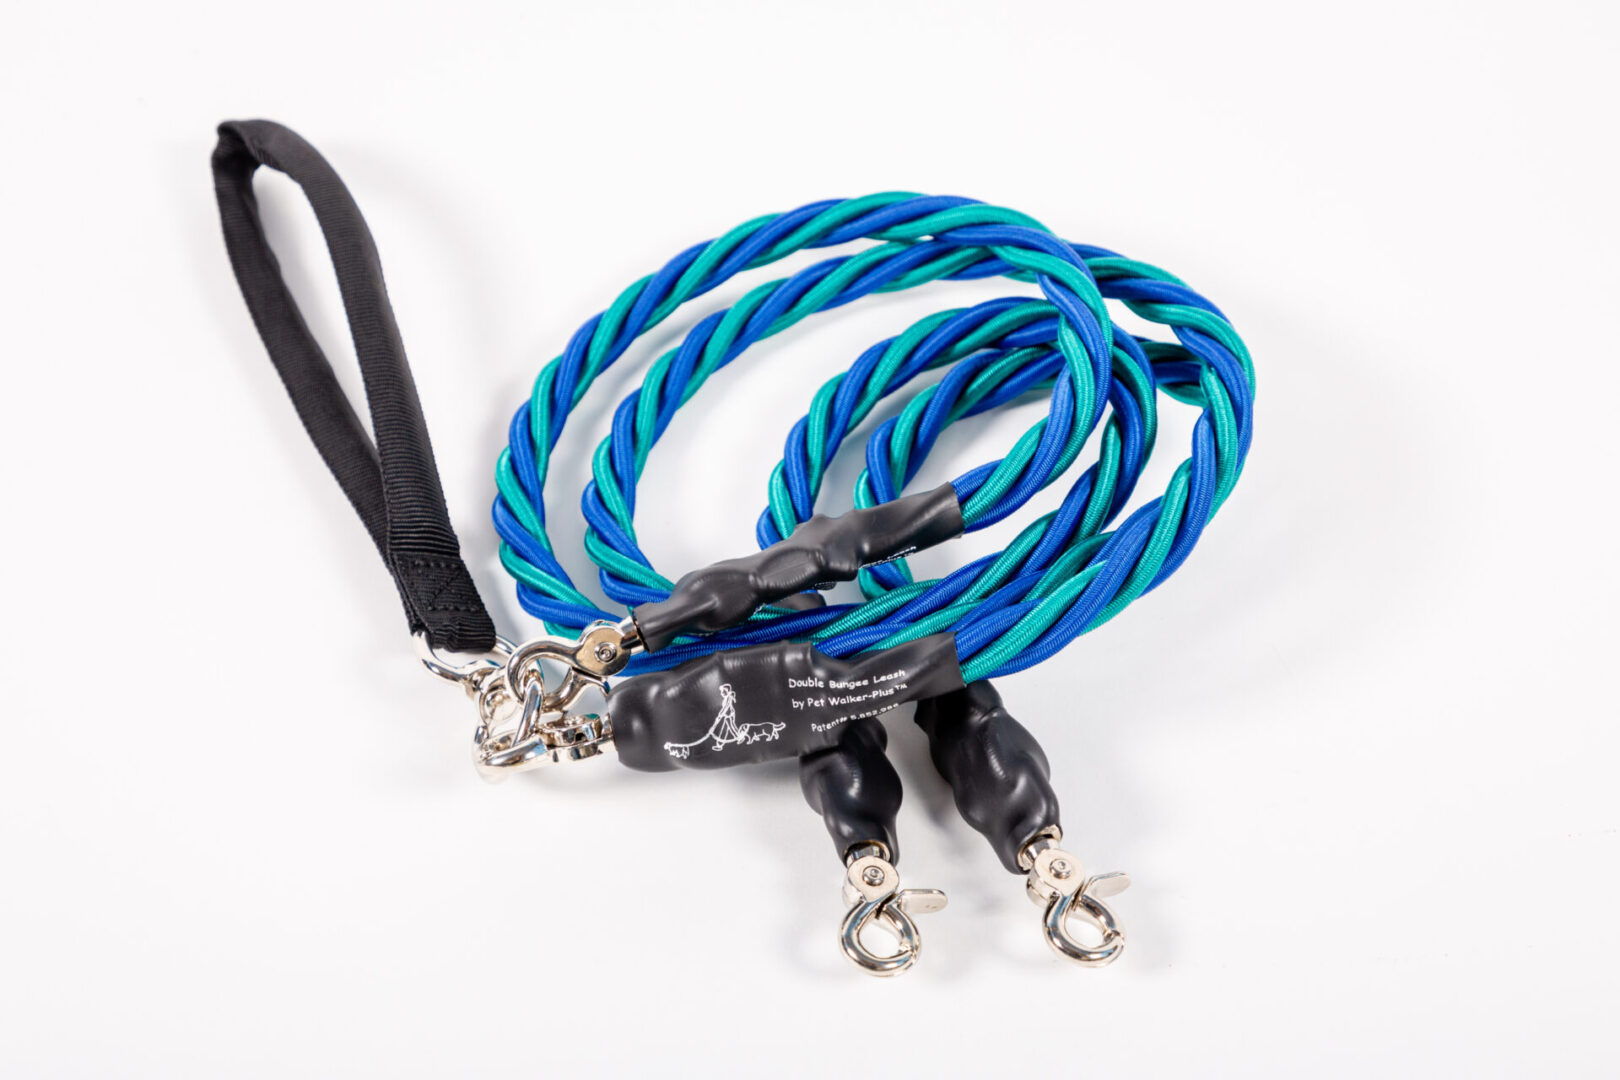 A Double Bungee Leash in Teal and Blue